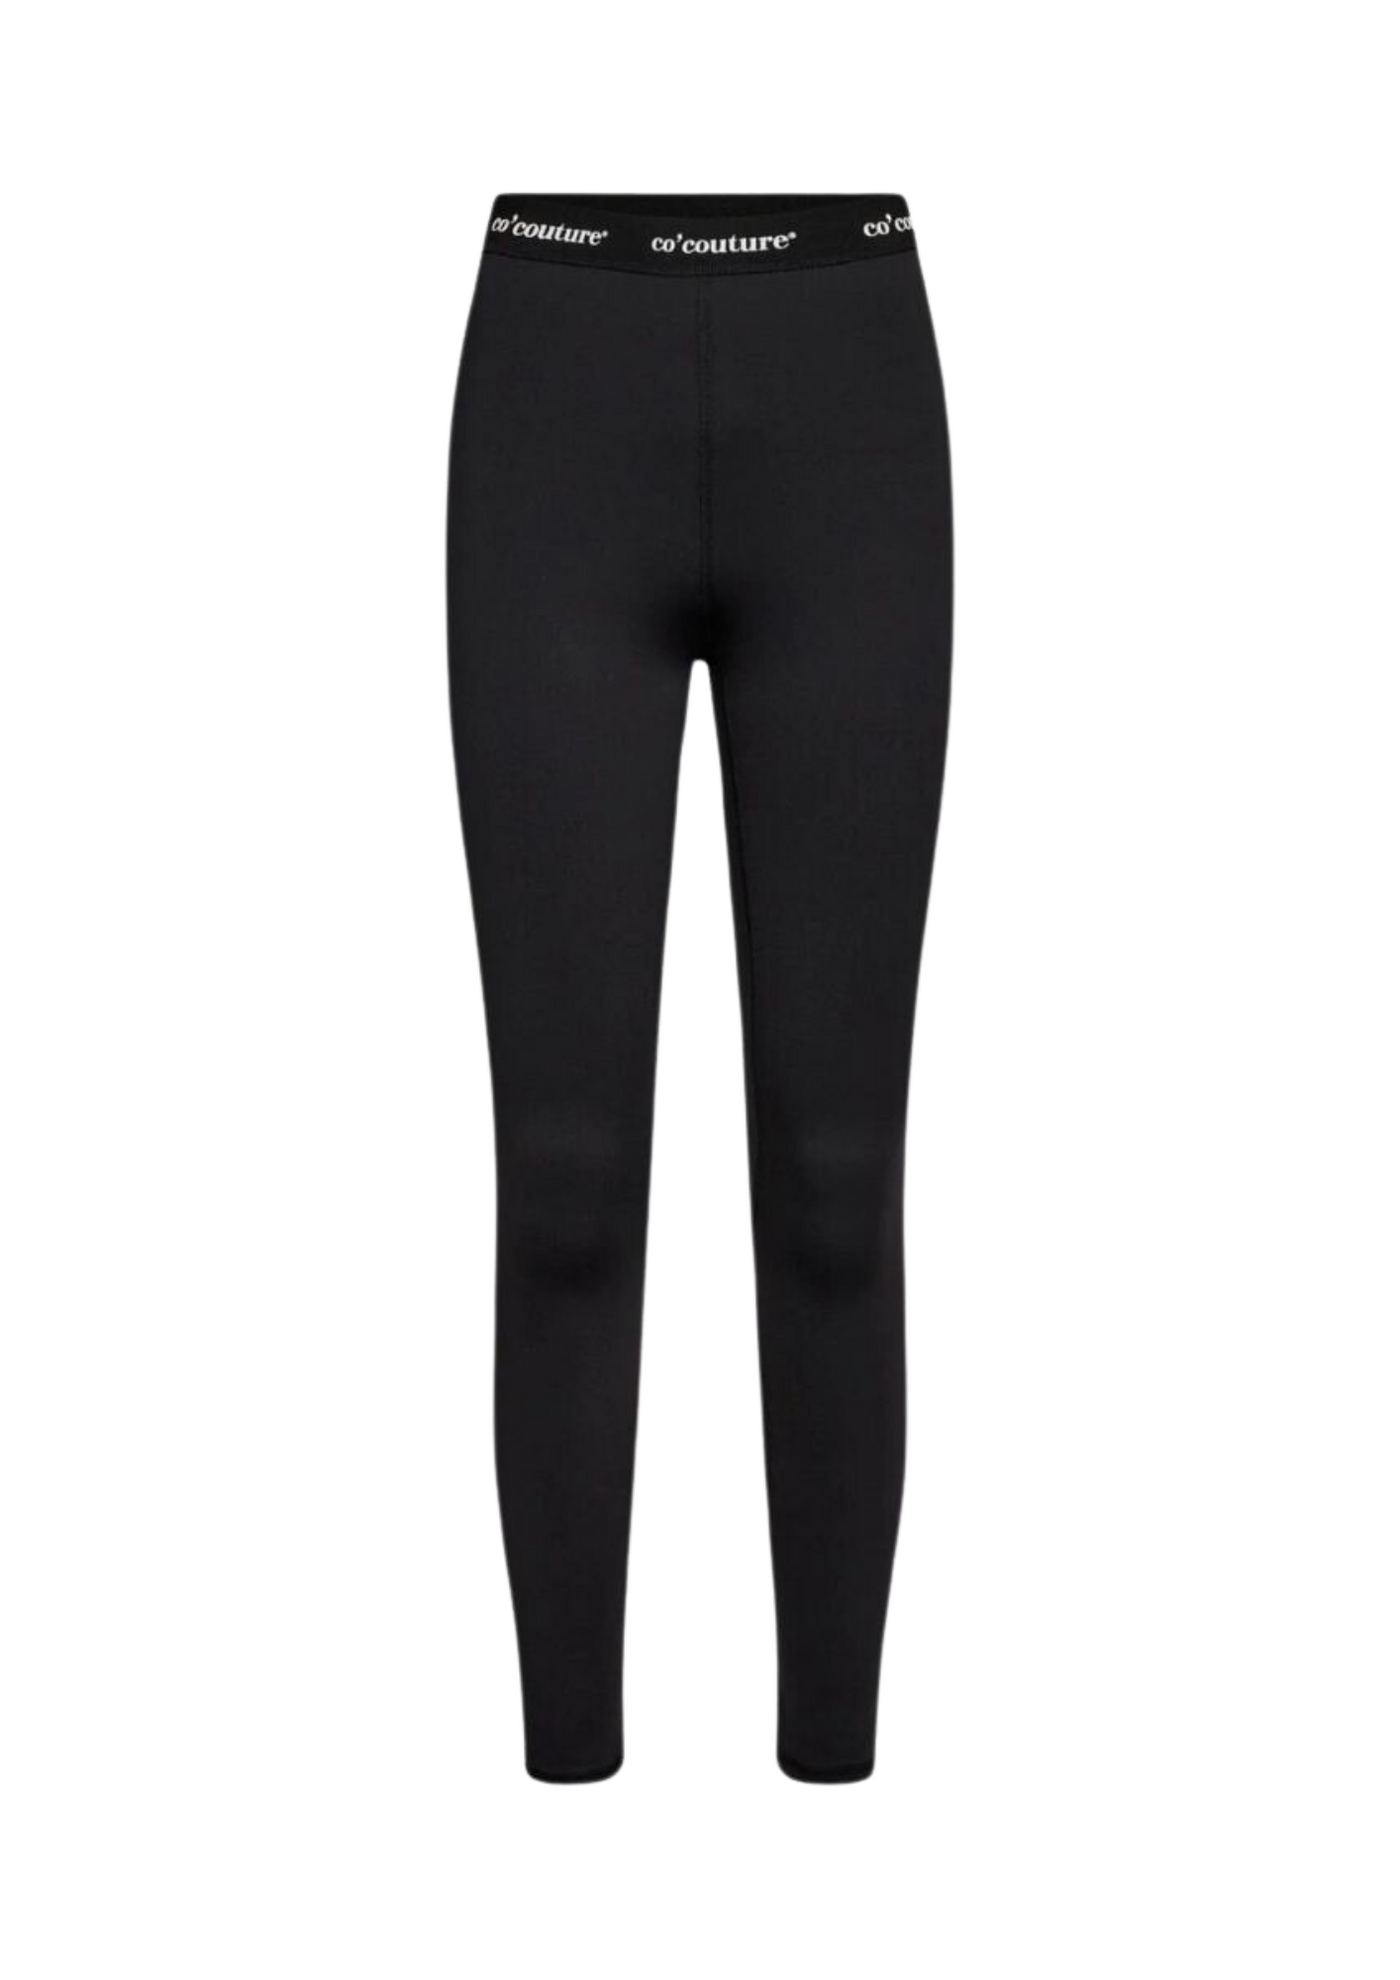 Co' Couture |  LiviaCC Logo Tights Black